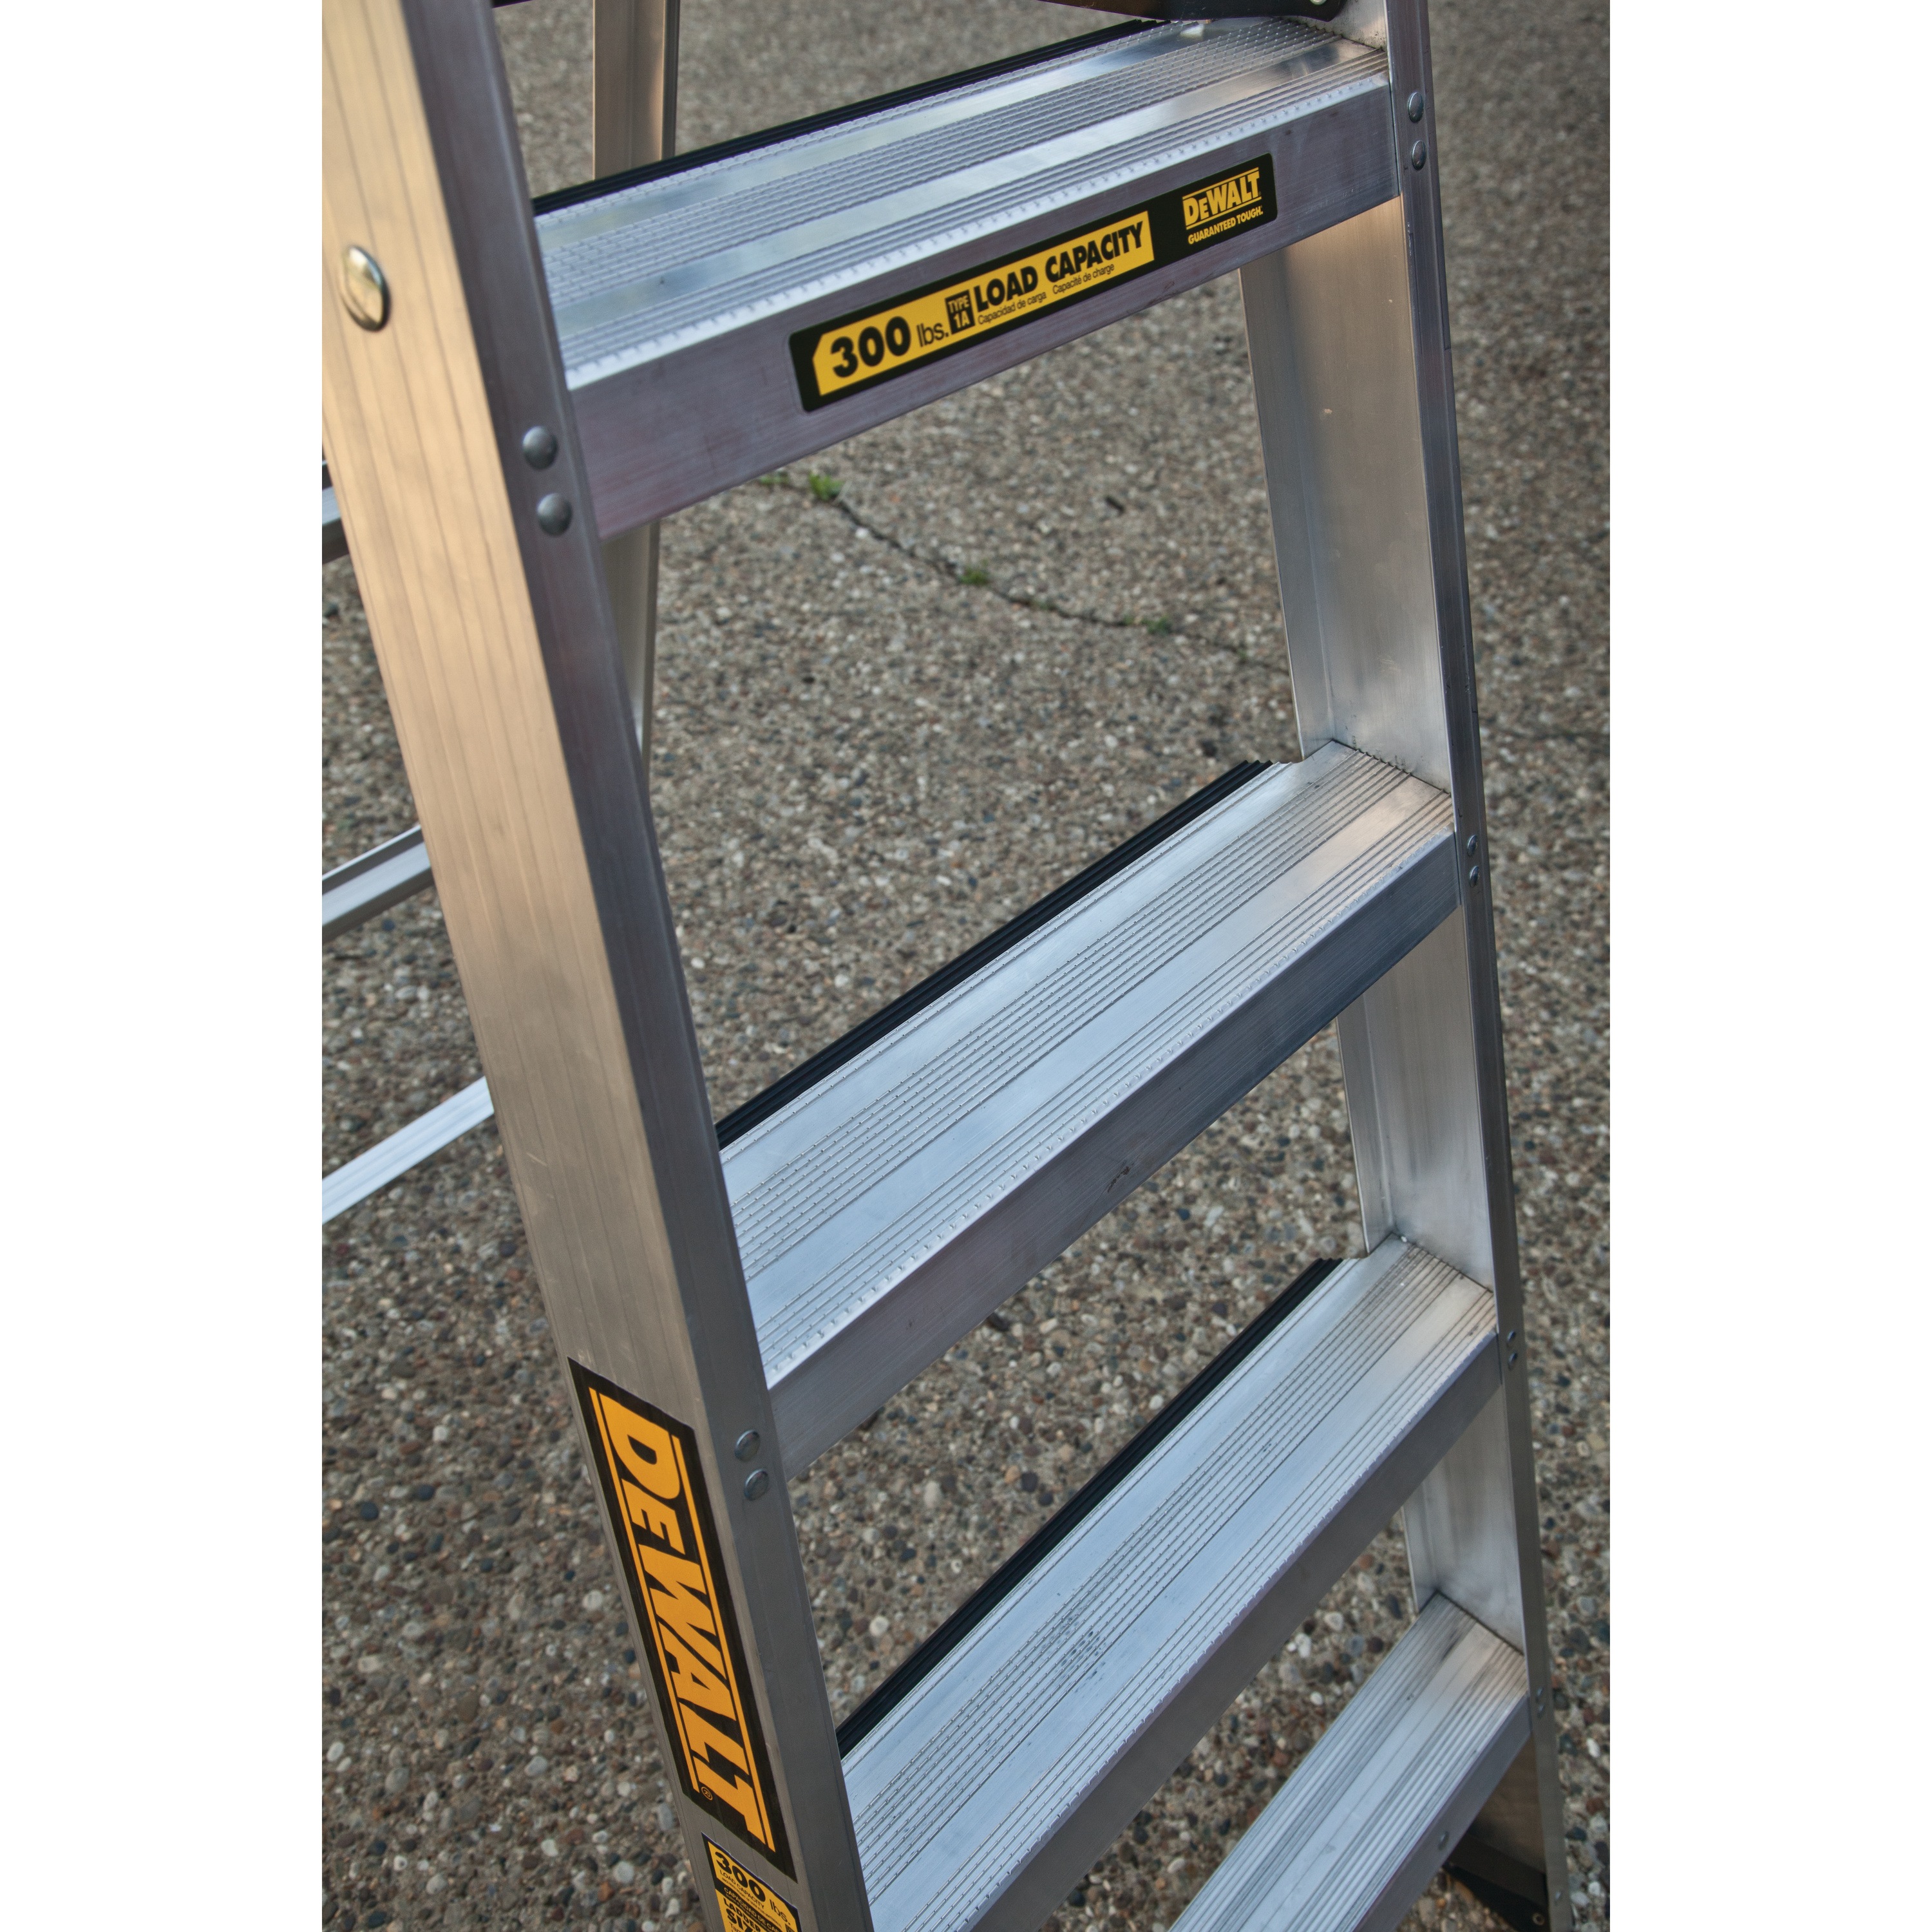 Greater step surface feature of 10 foot Aluminum Step Ladder.